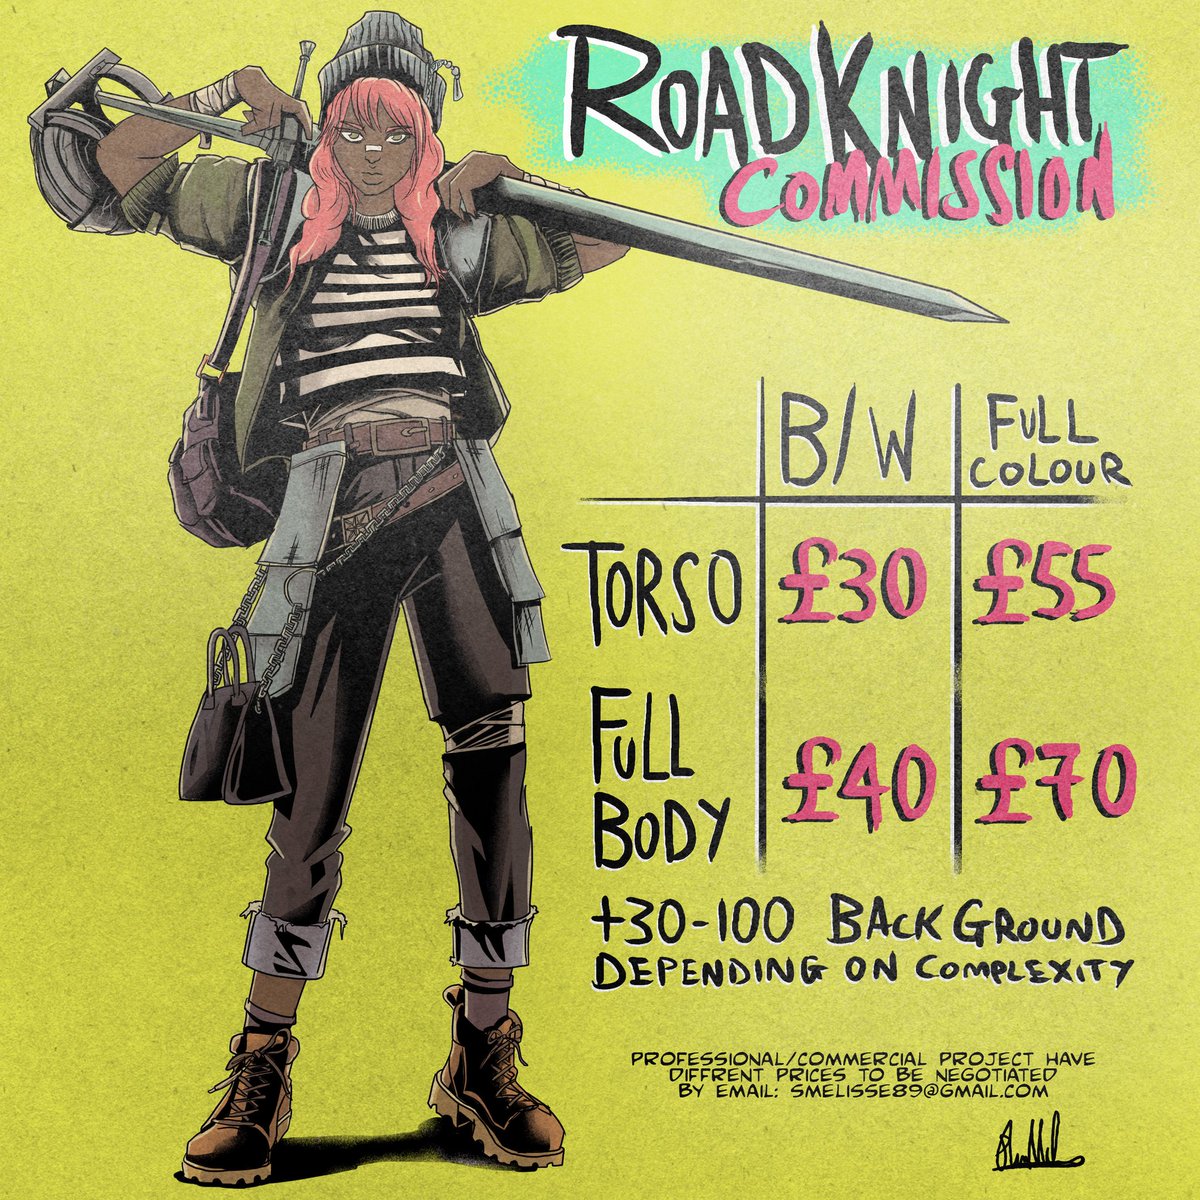 I'm open for commissions, Road Knight portraits or personal commissions.